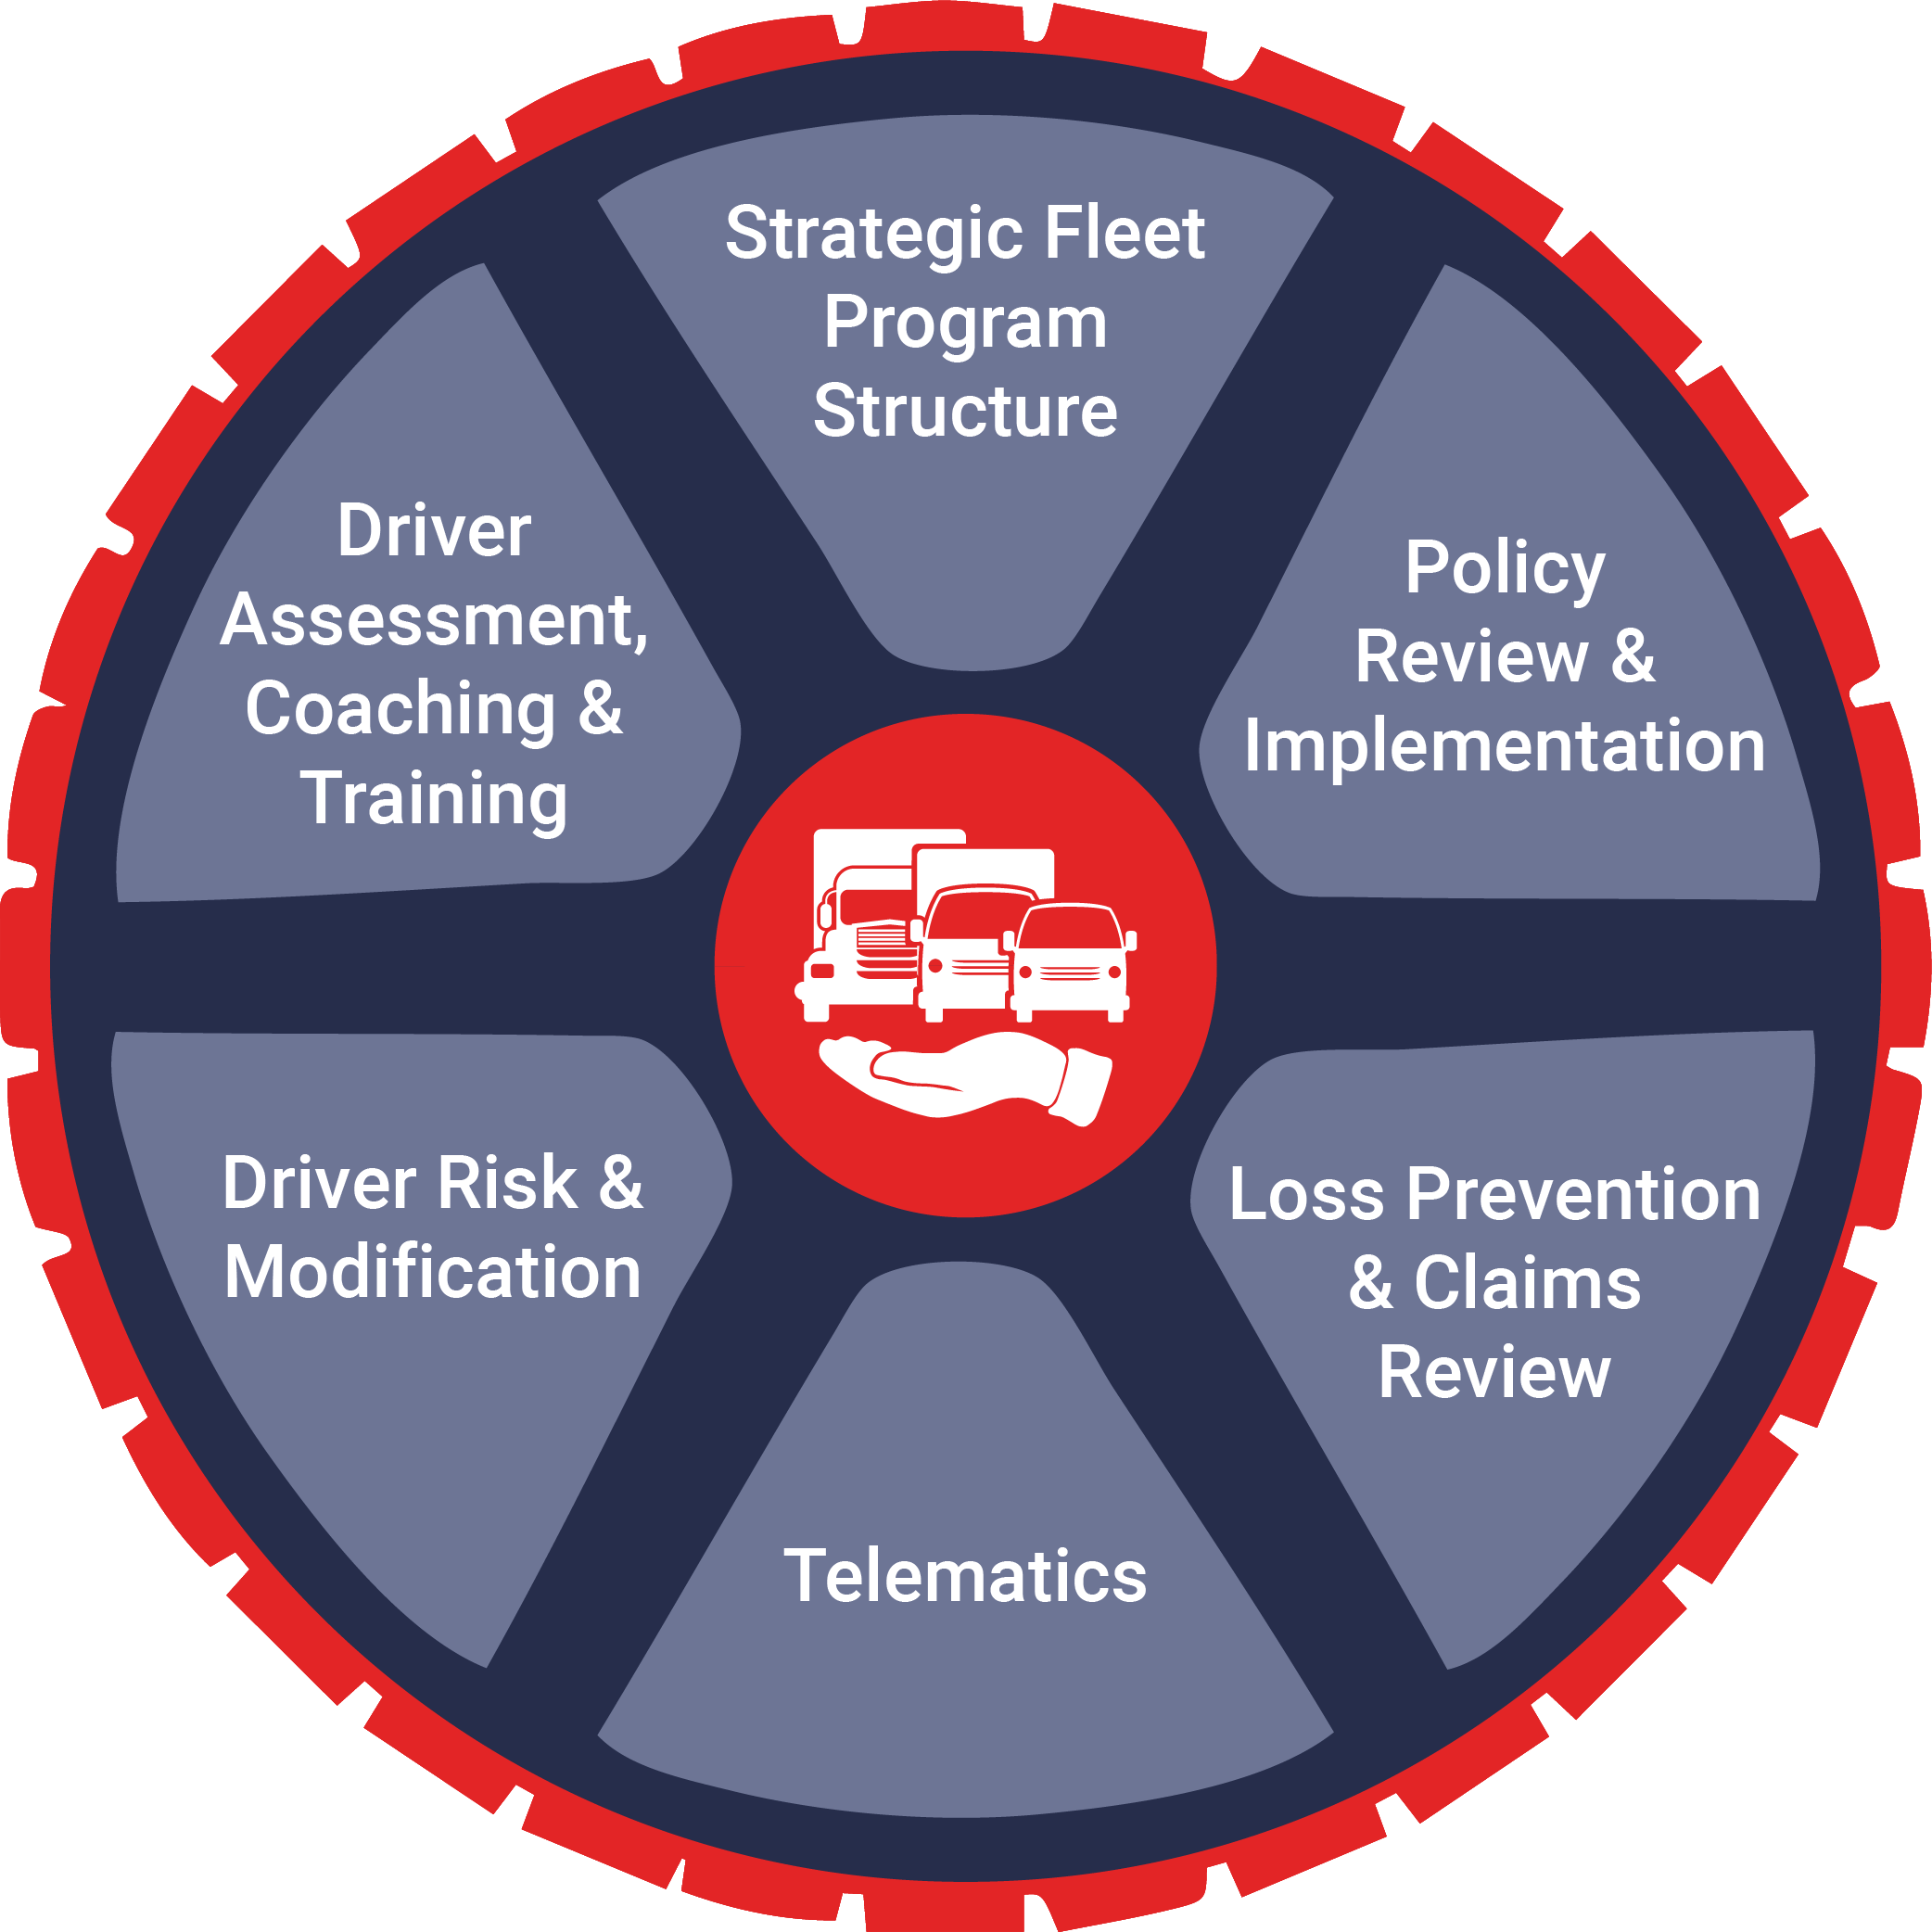 insight-mobile-data-s-complete-fleet-safety-program-to-help-fleets